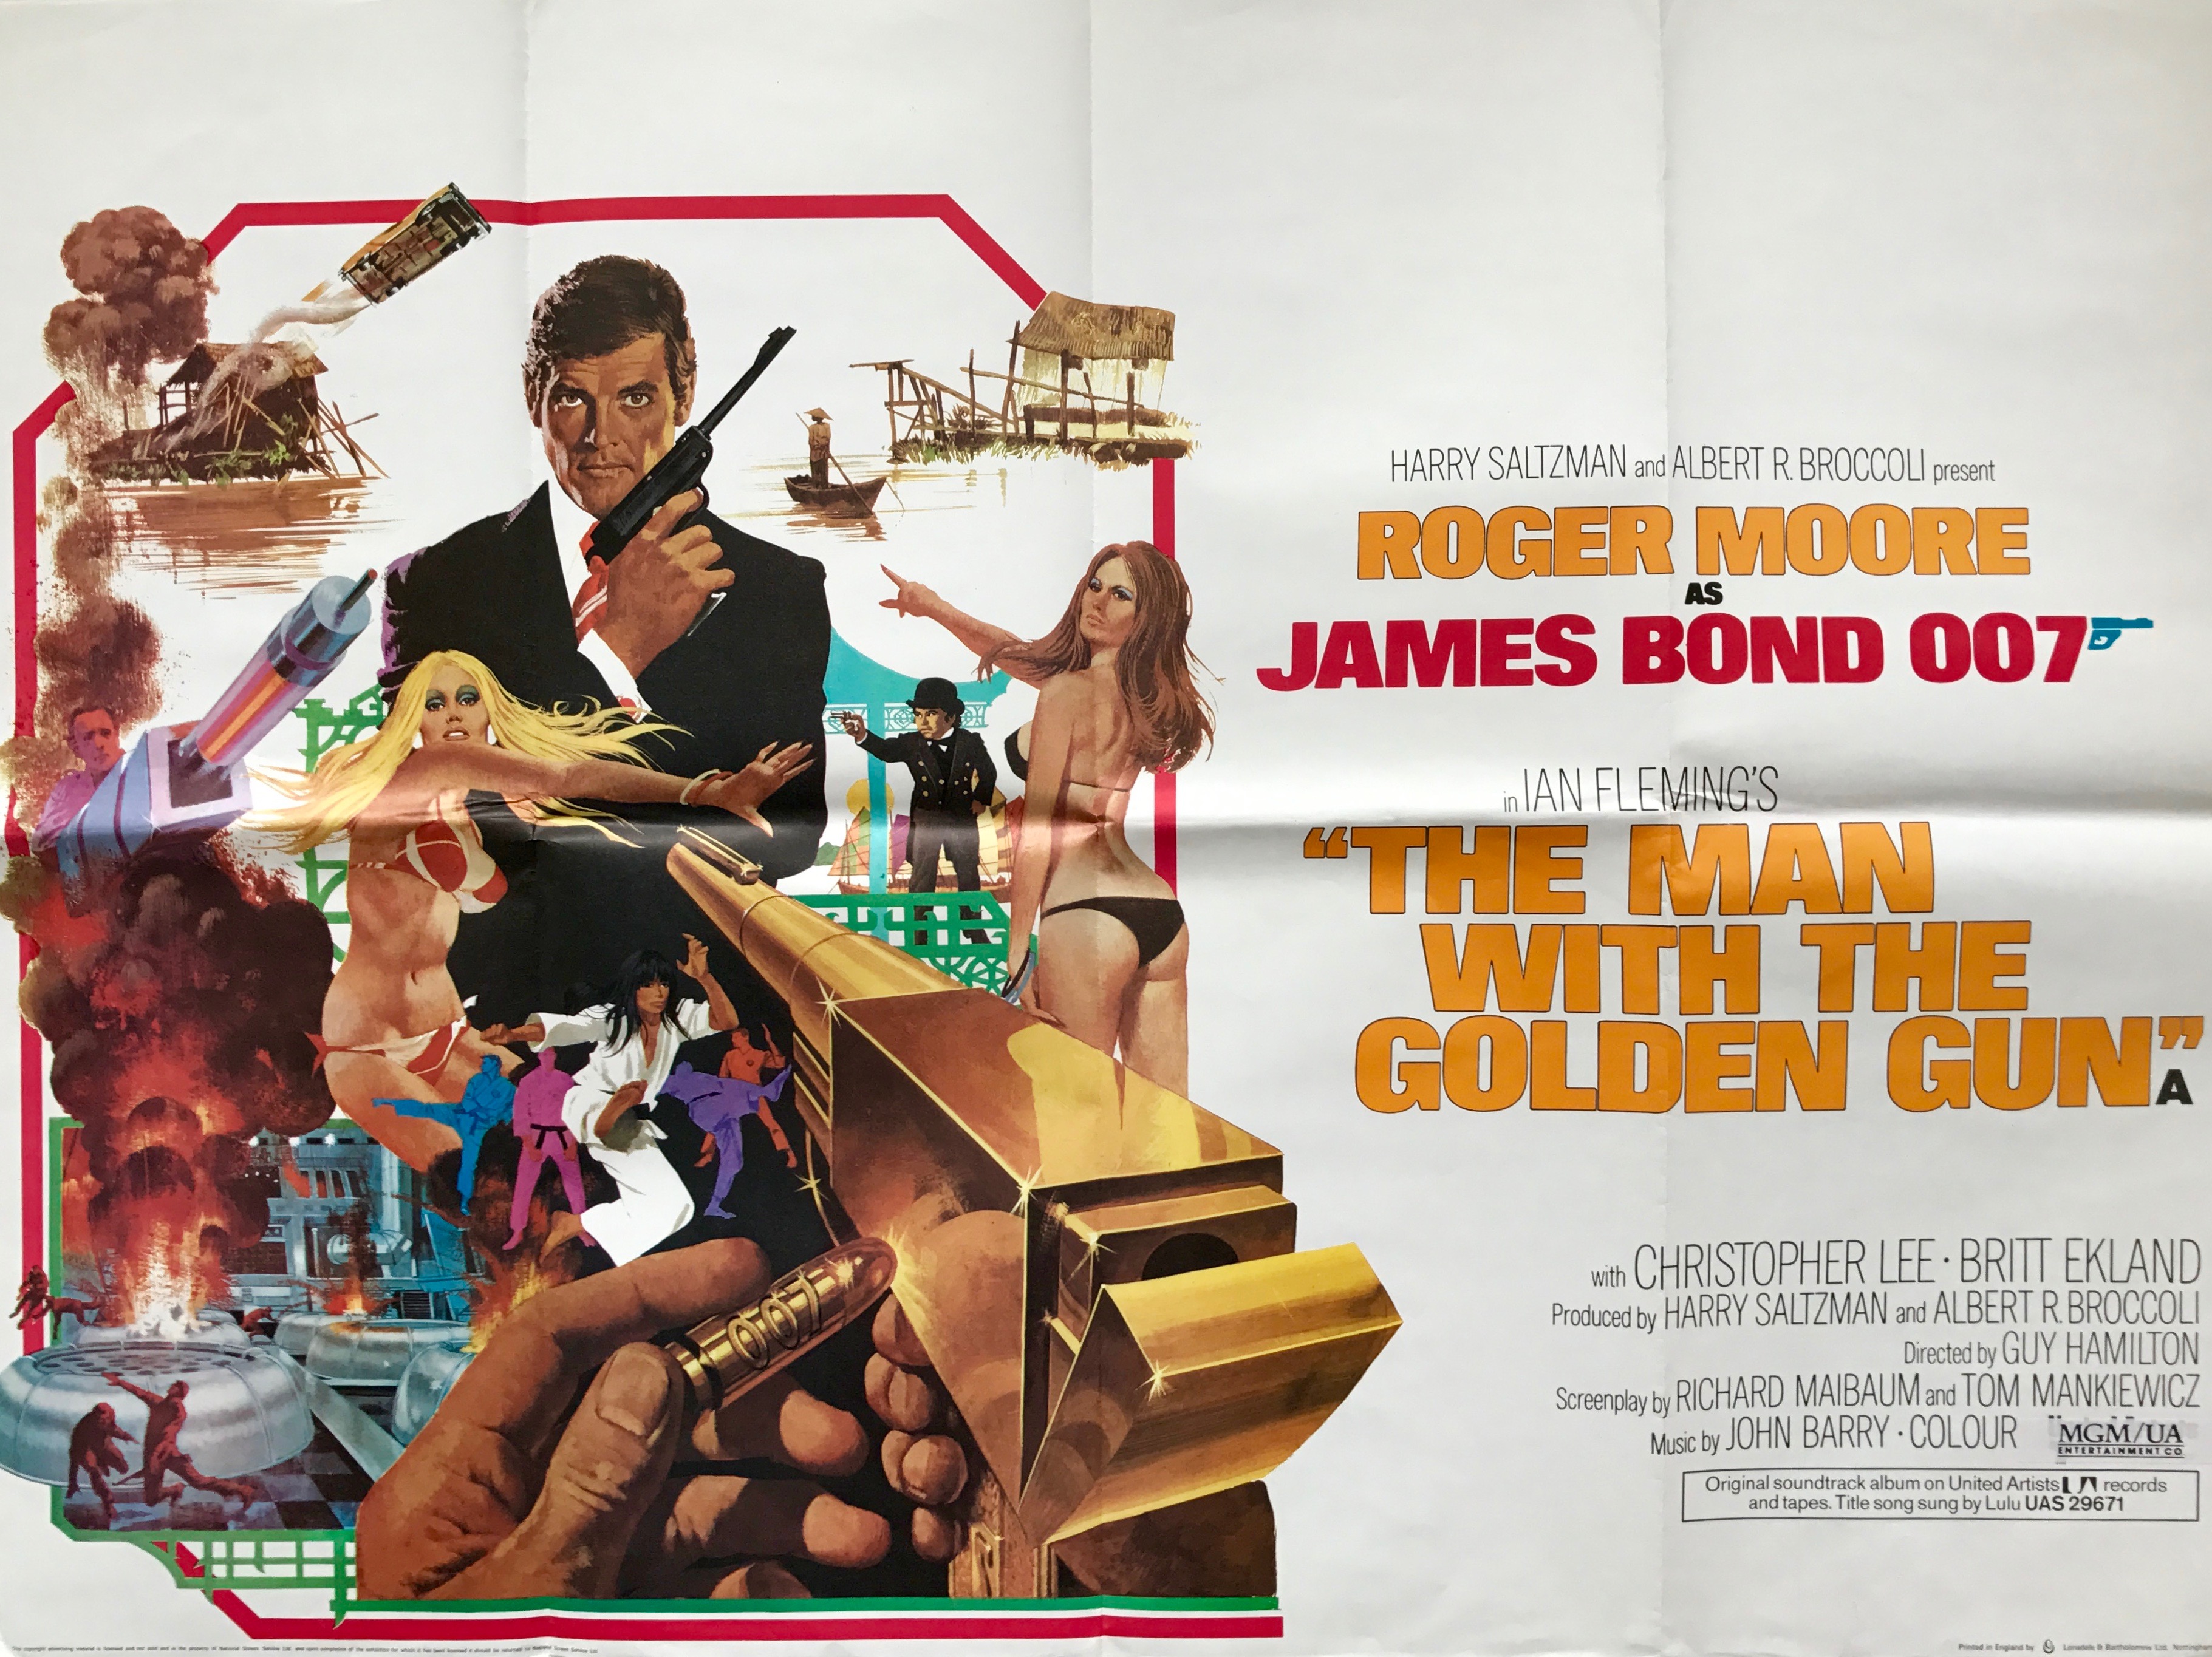 James Bond: The Man With The Golden Gun - 007 - Roger Moore